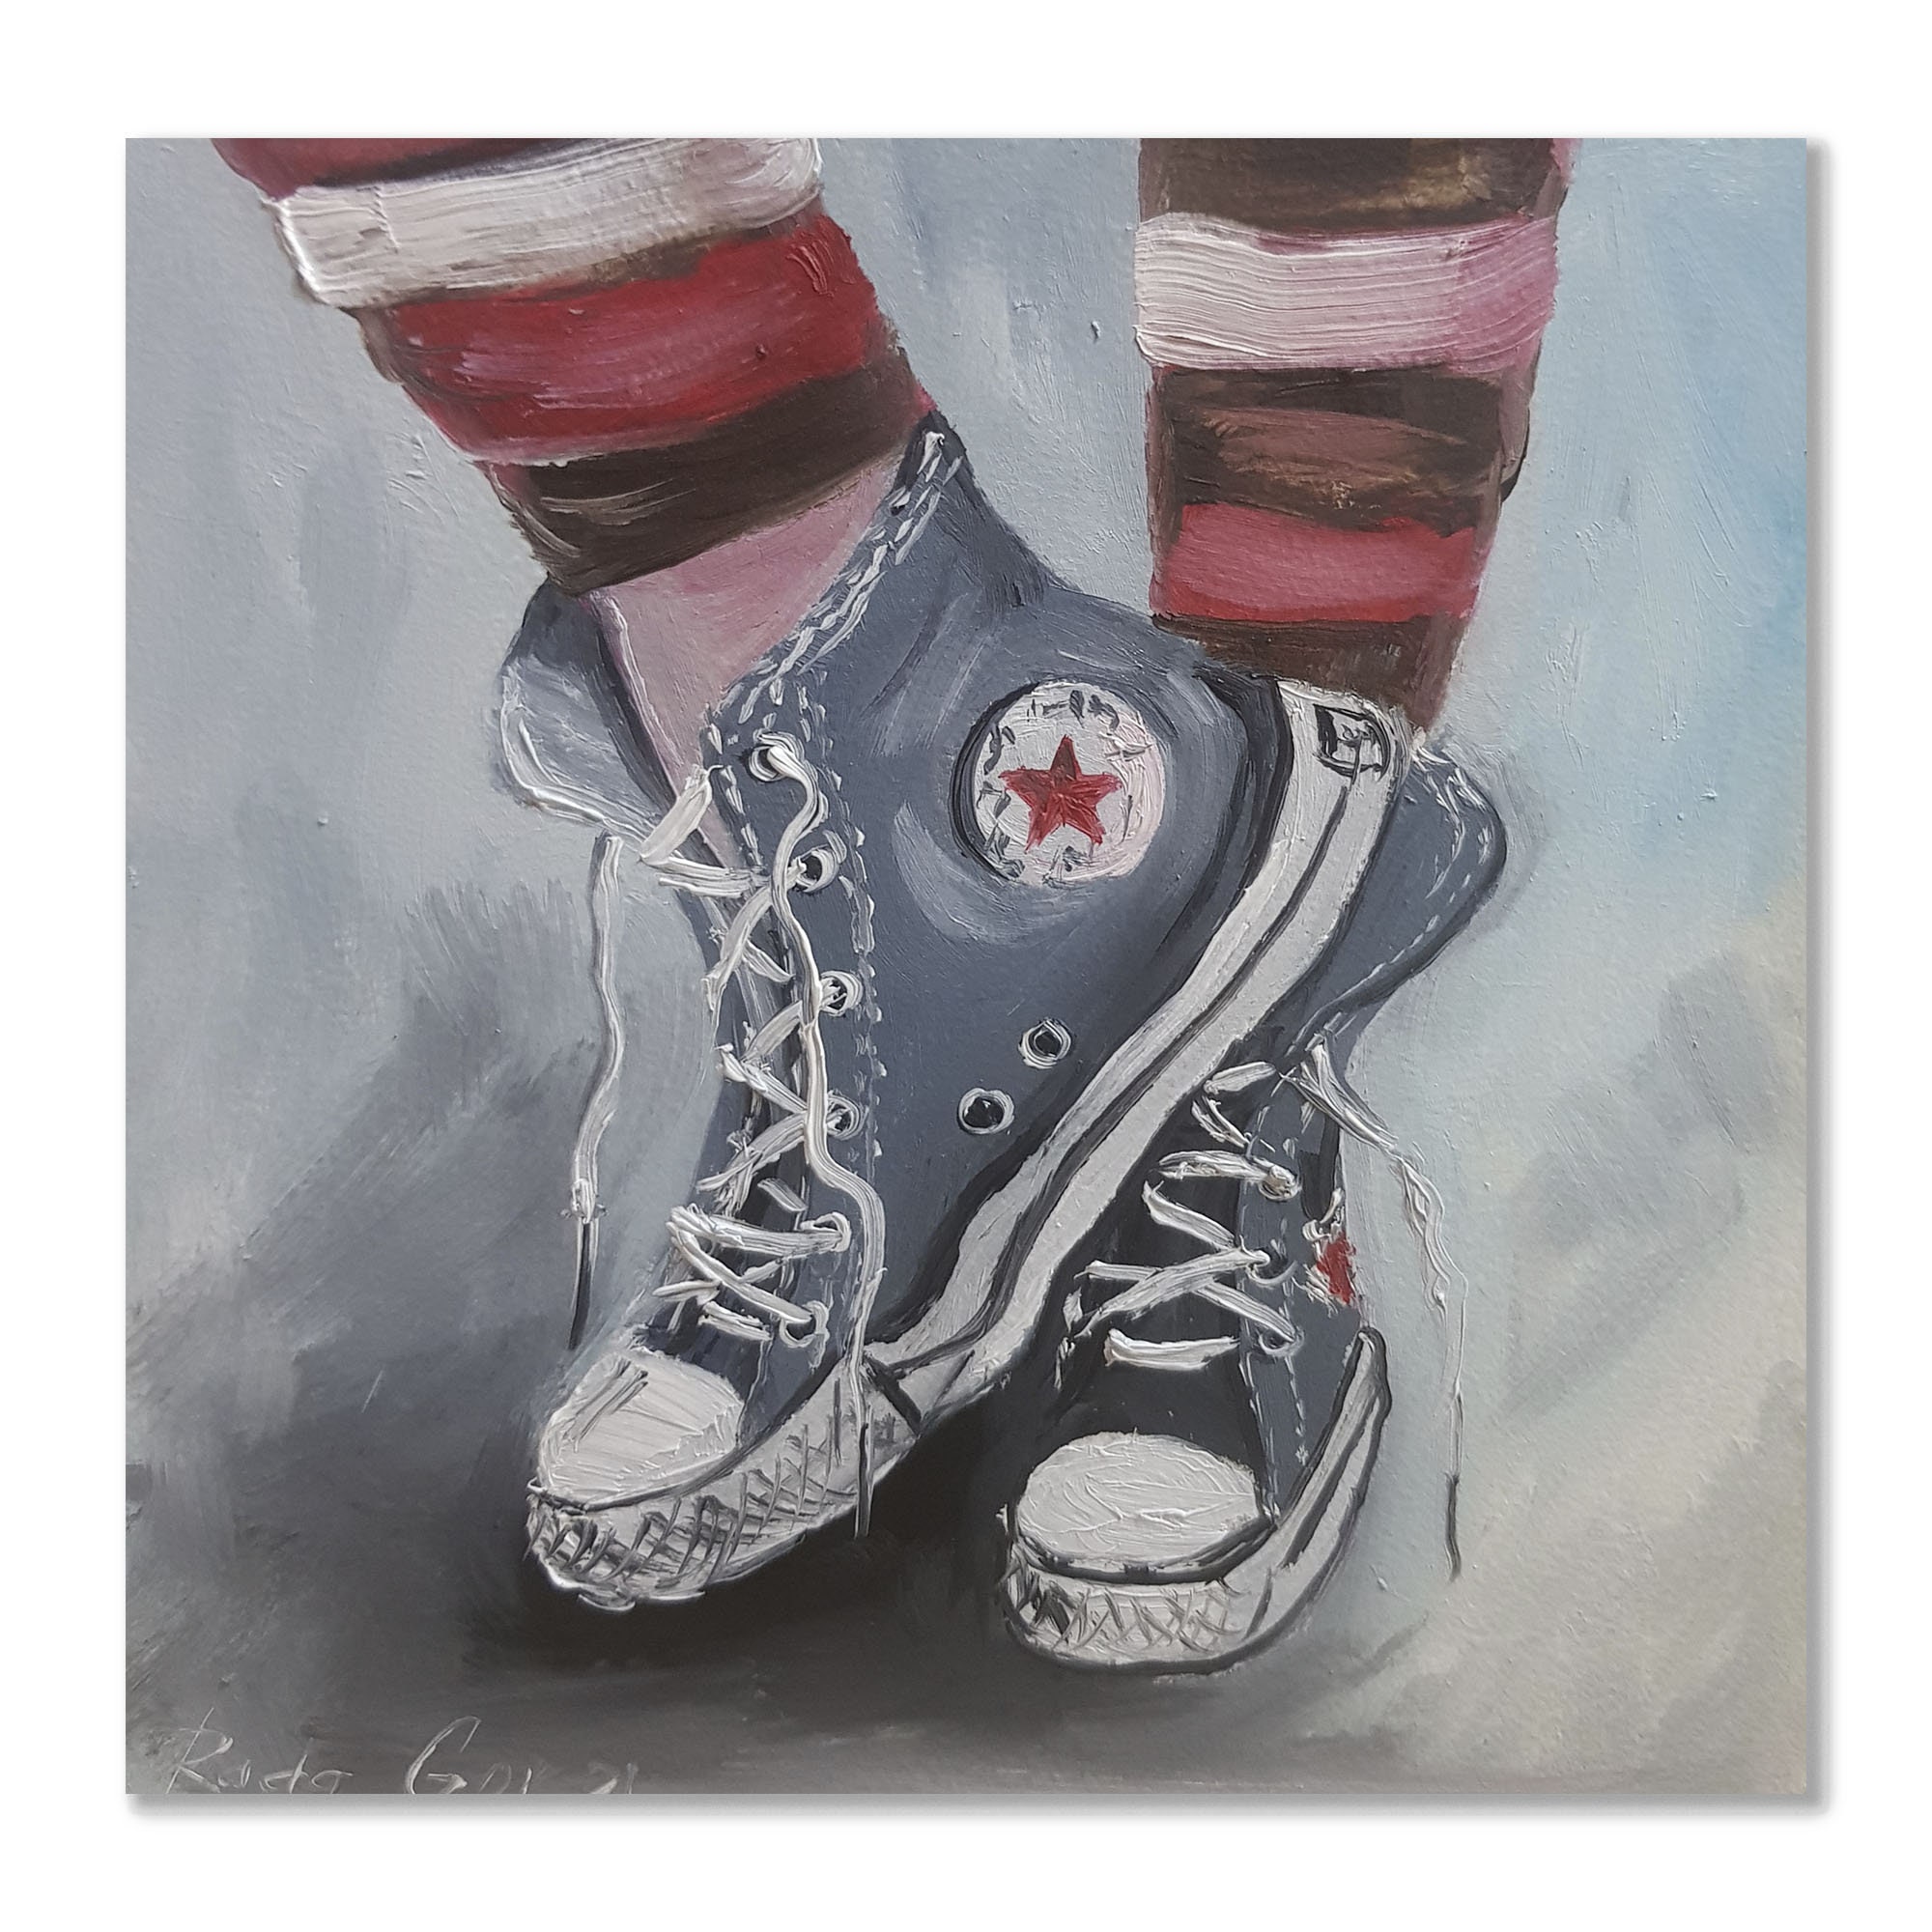 Converse Painting pic